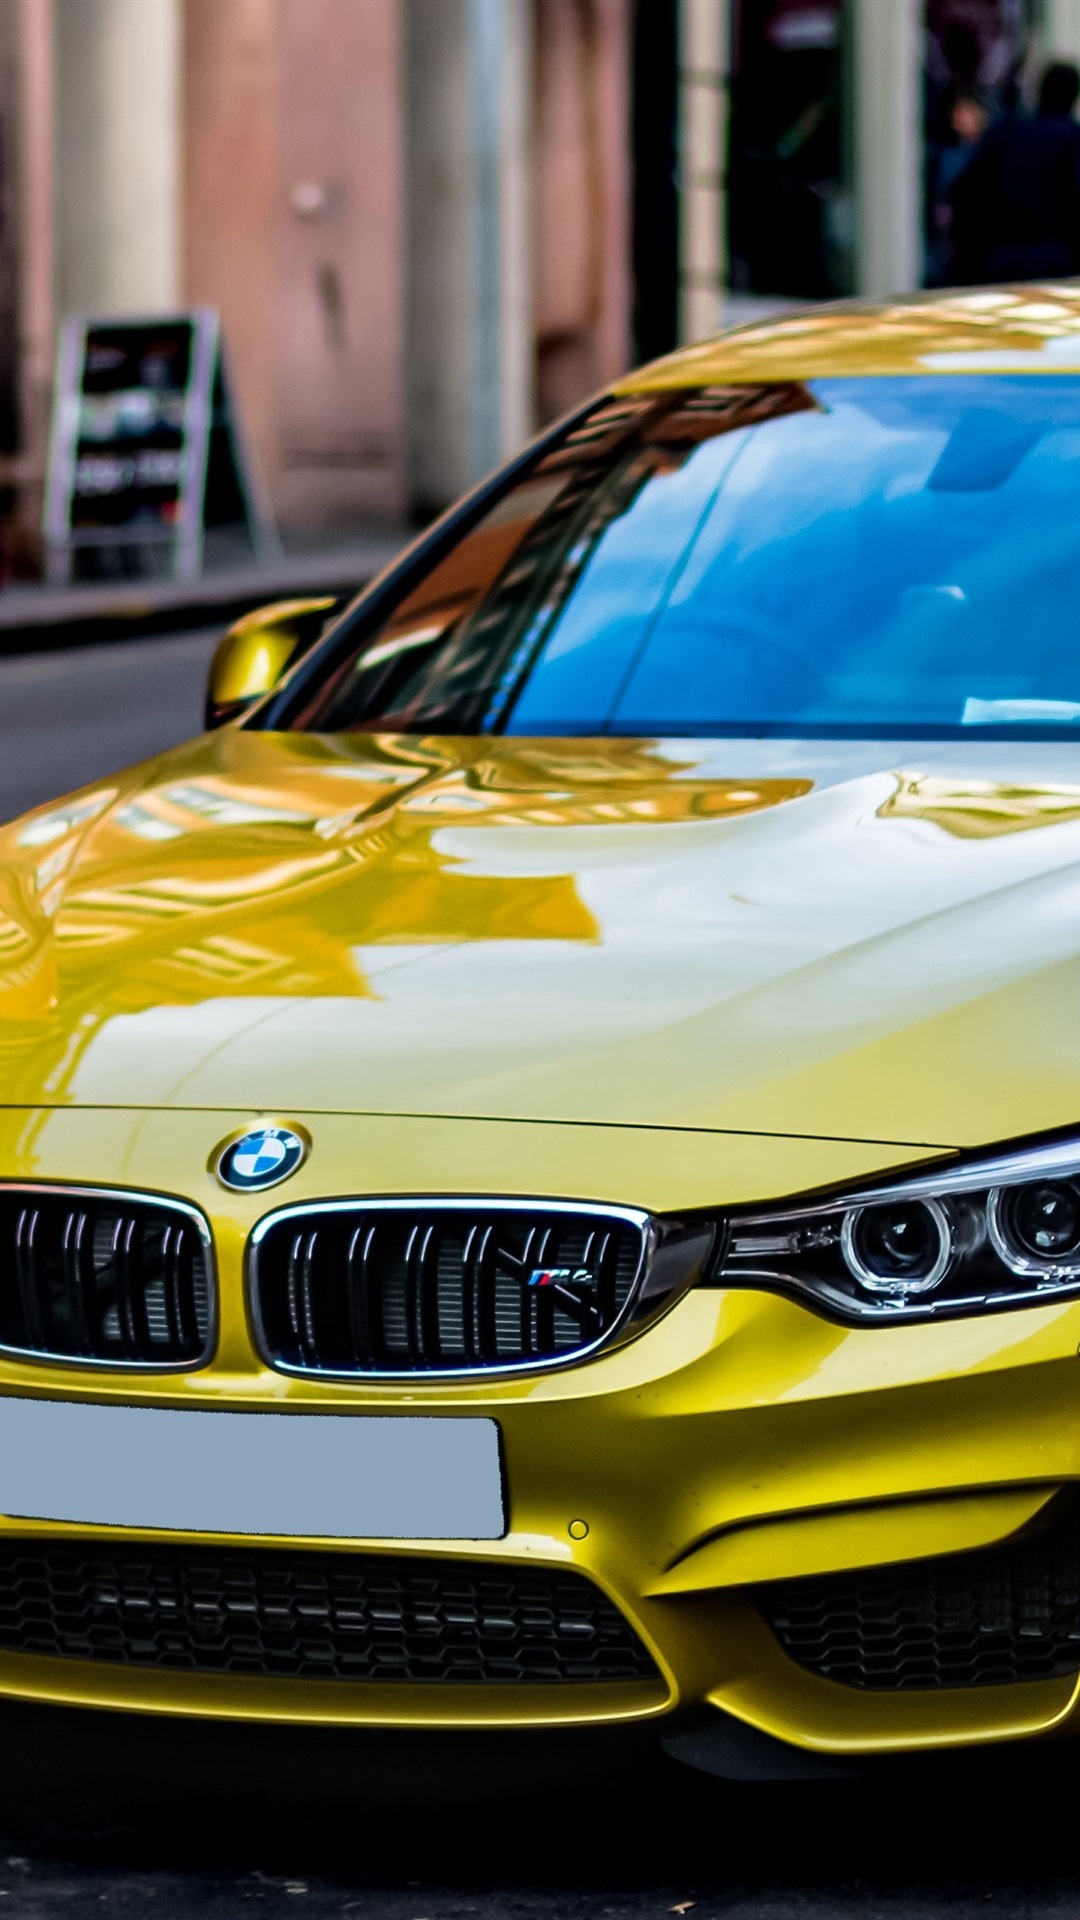 iPhone Wallpaper Yellow Bmw Car Stopped At Street Side M4 HD Wallpaper